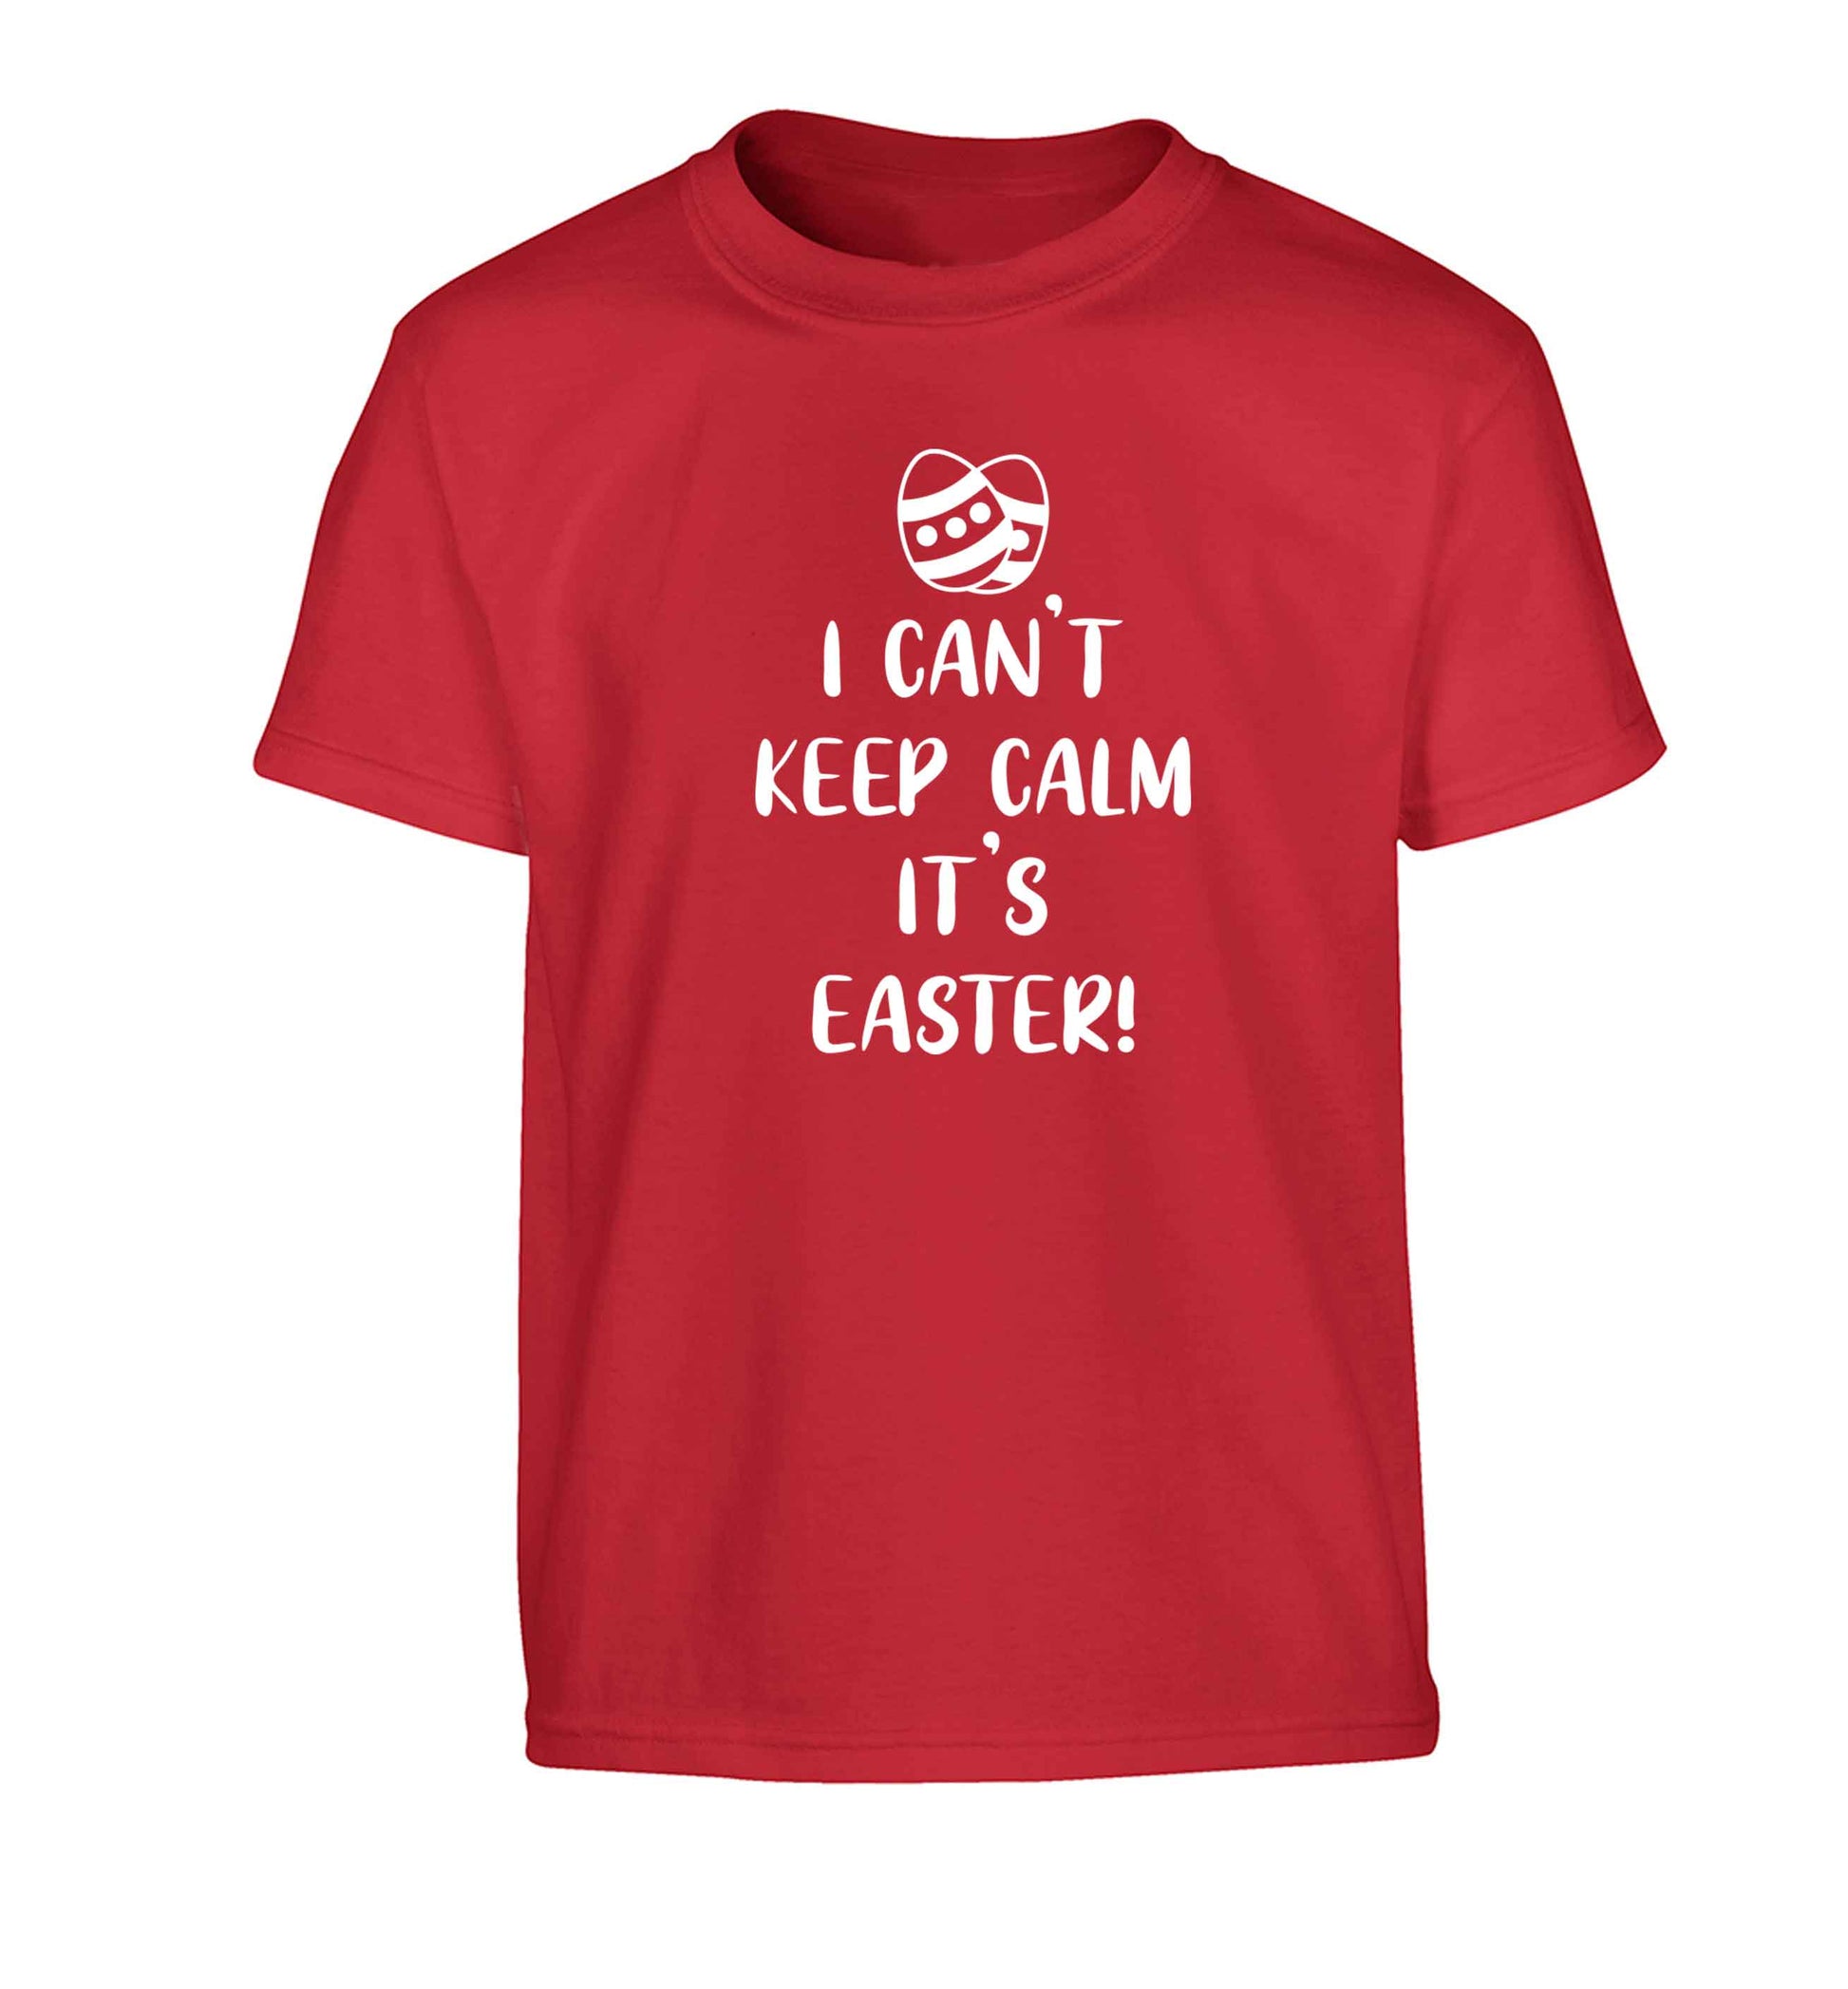 I can't keep calm it's Easter Children's red Tshirt 12-13 Years